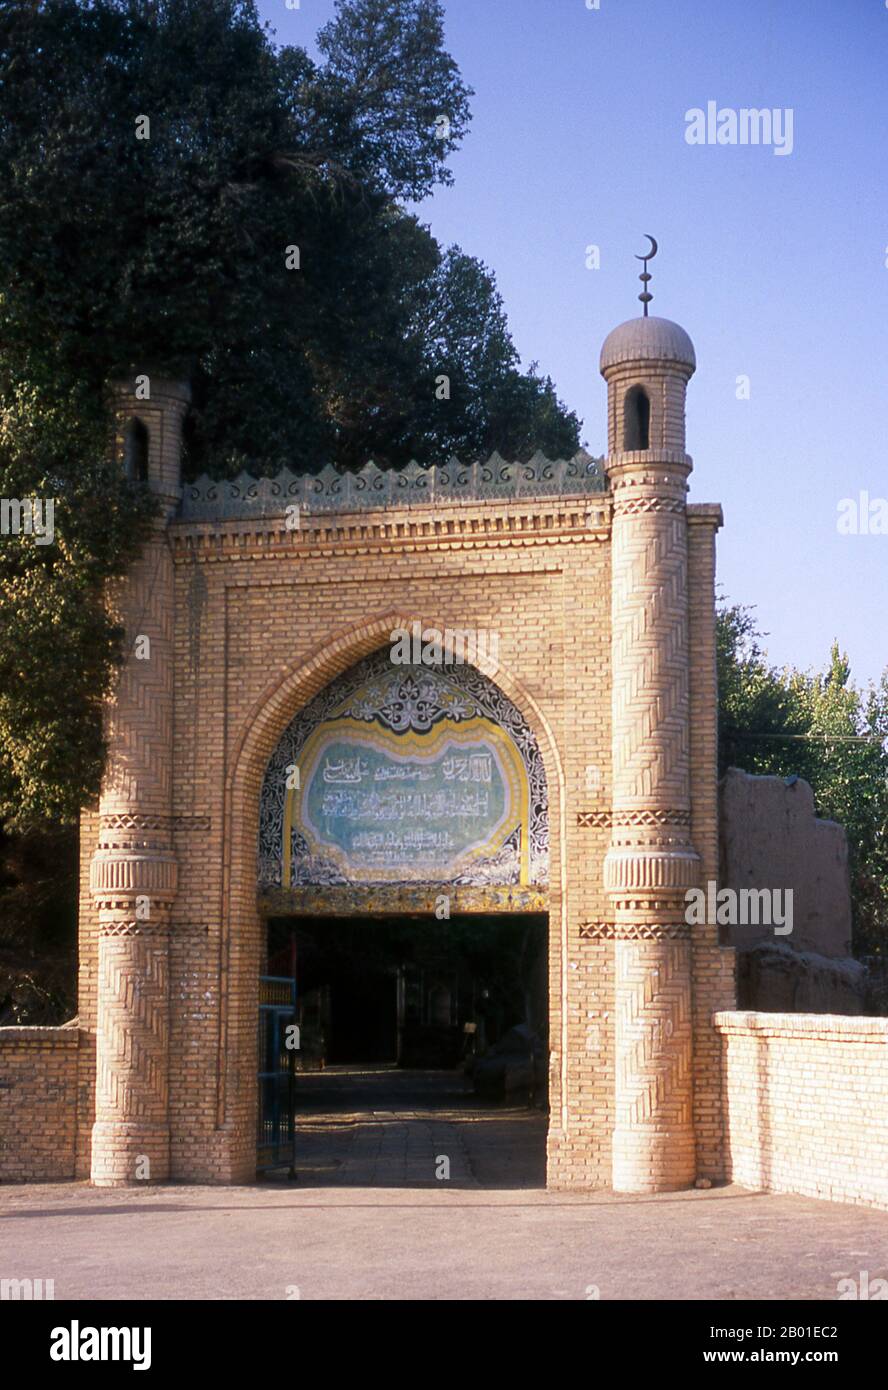 China: Entrance to Maulana Ashidin Khoja Mazar, Old Kuqa, Xinjiang Province.  The ancient oasis town of Kuqa (Kuche), though now overshadowed by Korla to the east and Aksu to the west, was once a key stop on the Northern Silk Road. It first came under Han Chinese control when it was conquered, in 91 CE, by the indomitable General Ban Chao.  By the 4th century it had emerged as an important centre of Tocharian civilisation sitting astride not just the Northern Silk Road, but also lesser routes to Dzungaria in the north and Khotan in the south. Stock Photo